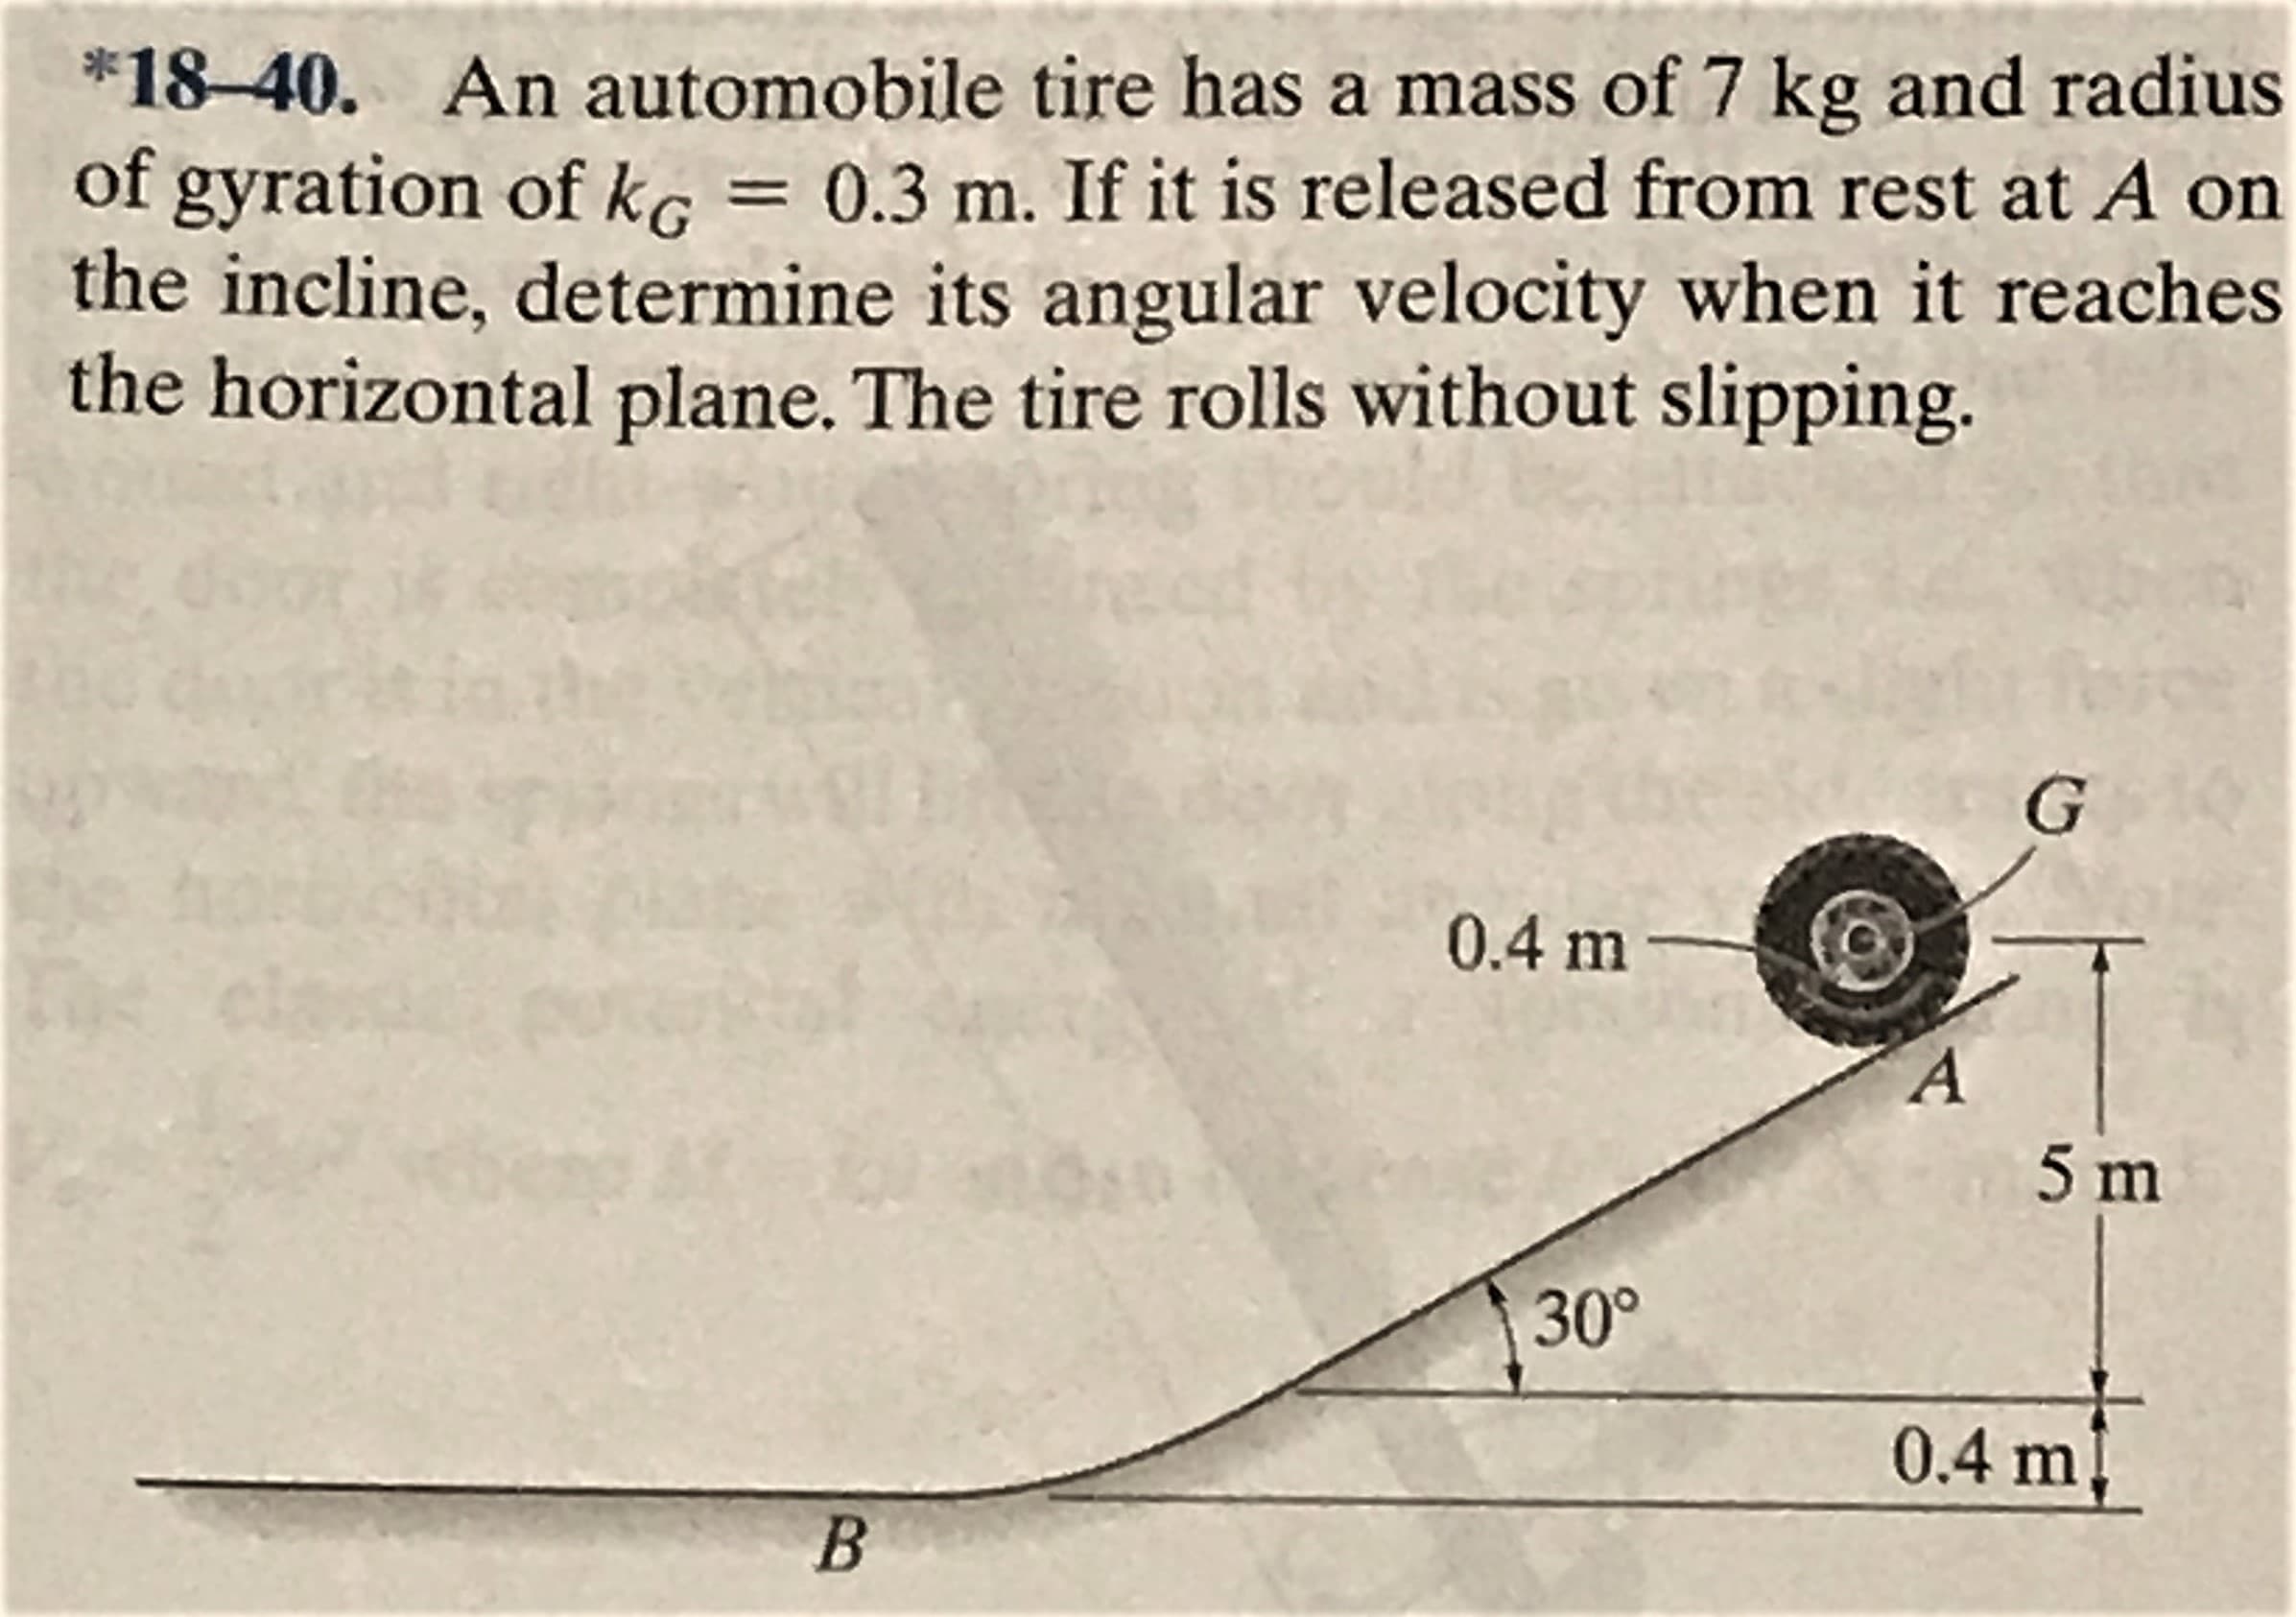 *18-40. An automobile tire has a mass of 7 kg and radius
of gyration of kg = 0.3 m. If it is released from rest at A on
the incline, determine its angular velocity when it reaches
the horizontal plane. The tire rolls without slipping.
0.4 m-
5 m
30°
0.4 m
